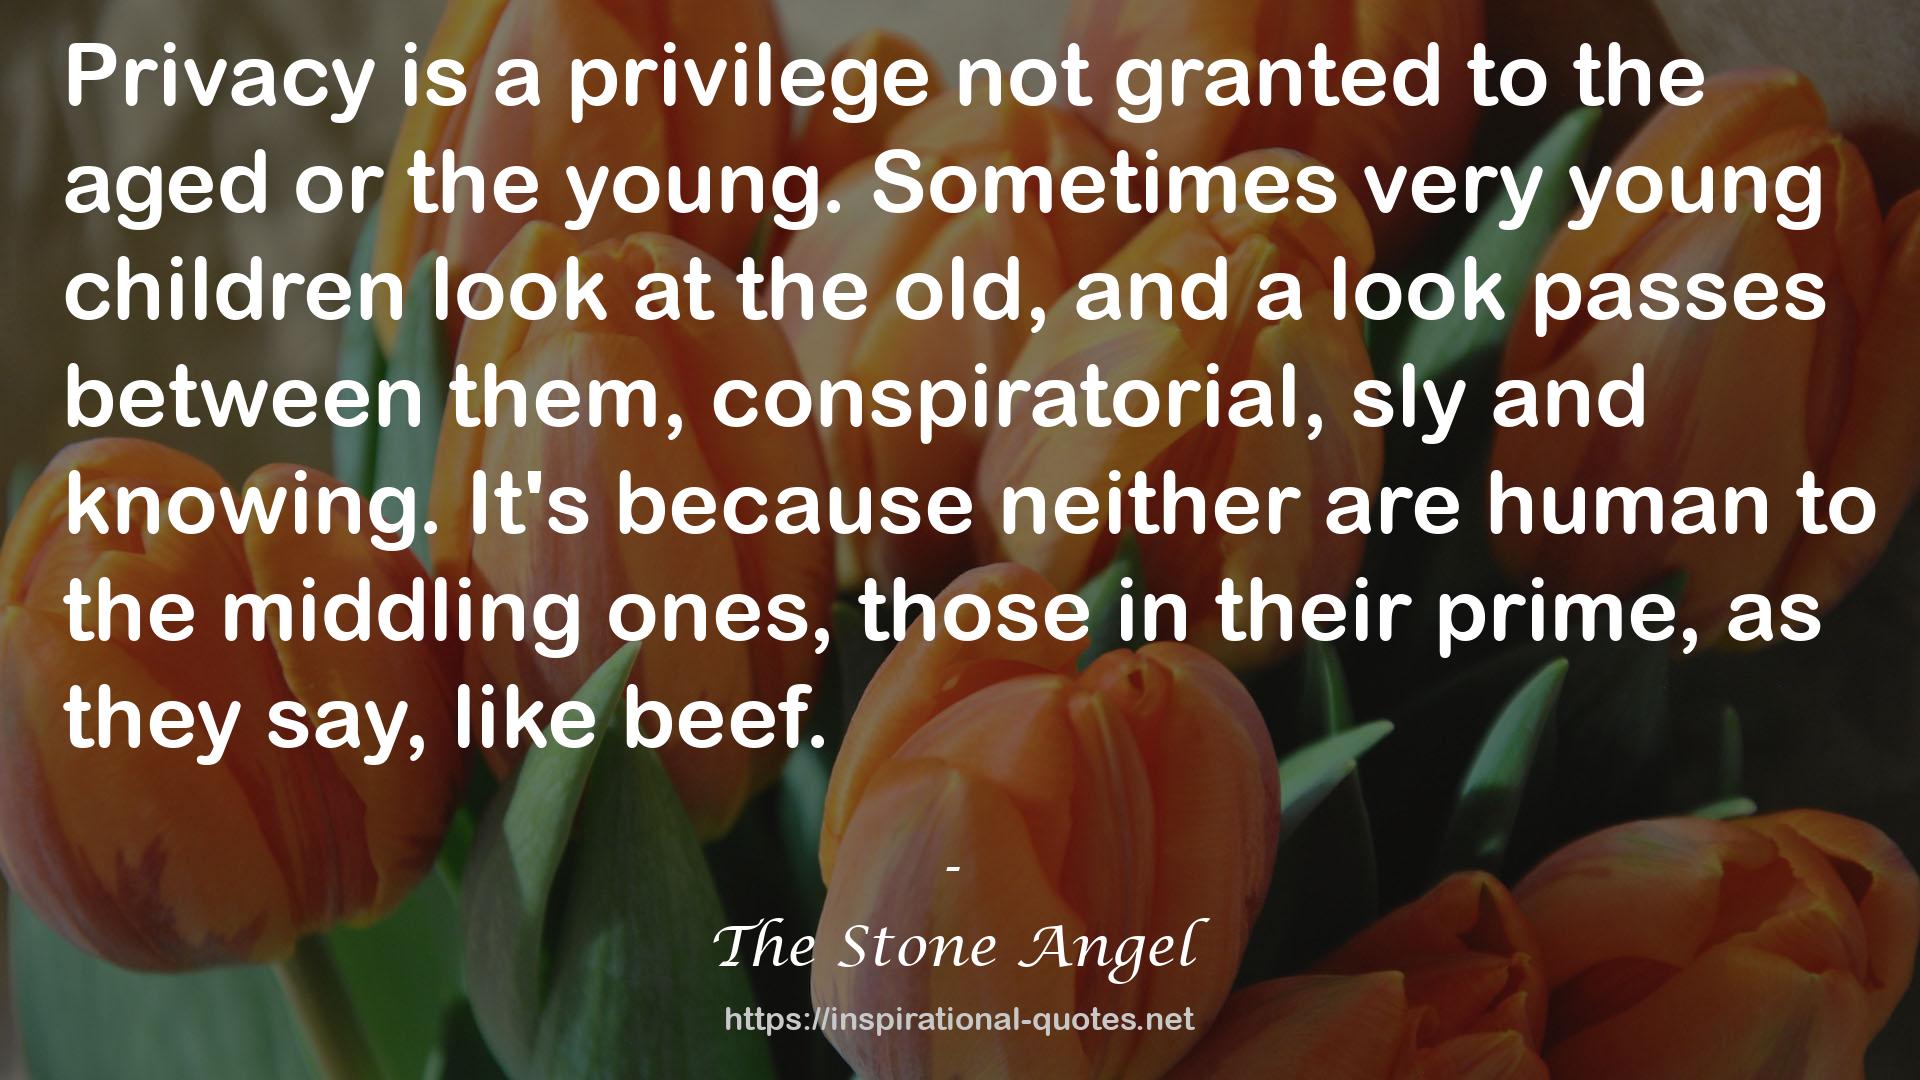 The Stone Angel QUOTES